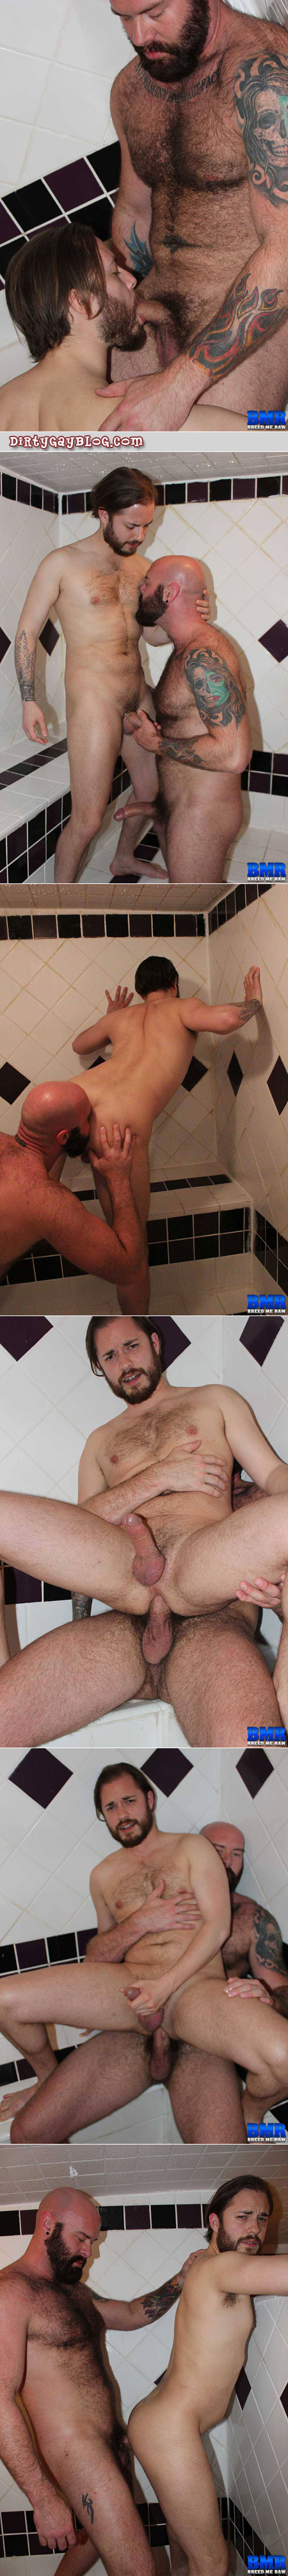 Hairy bear and cub fucking bareback in the steam room at the gym.